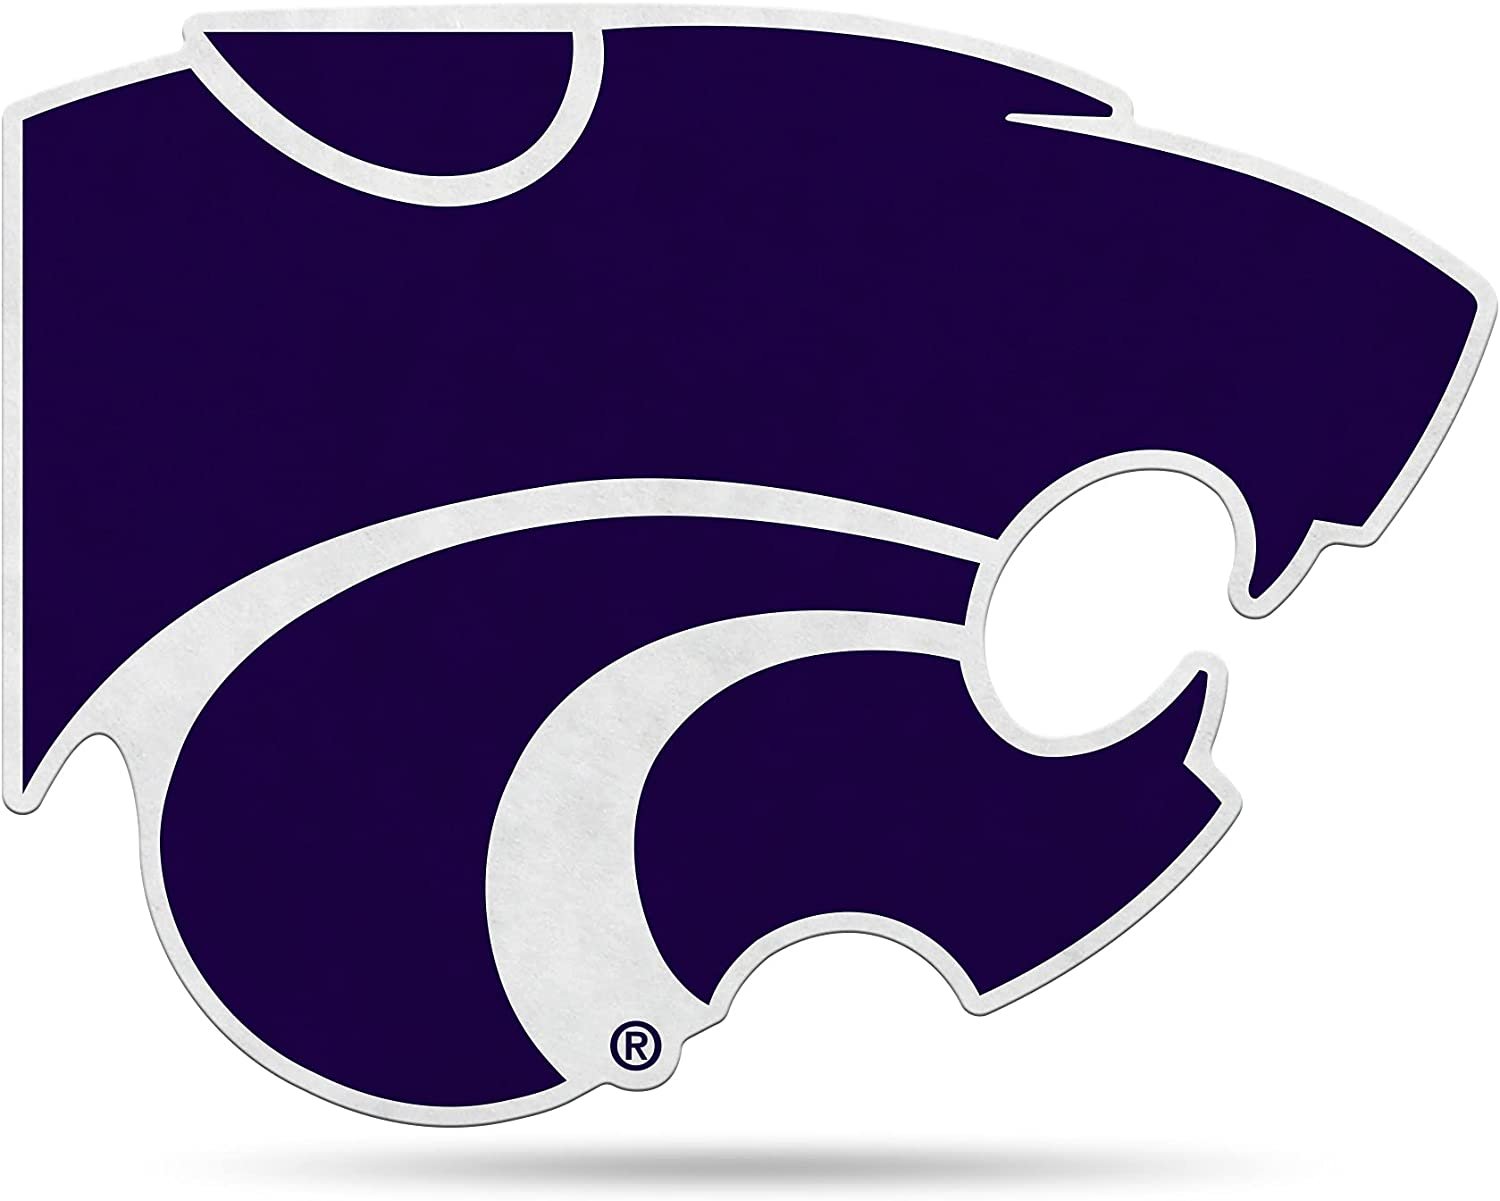 Kansas State University Wildcats Soft Felt Pennant, Primary Design, Shape Cut, 18 Inch, Easy To Hang